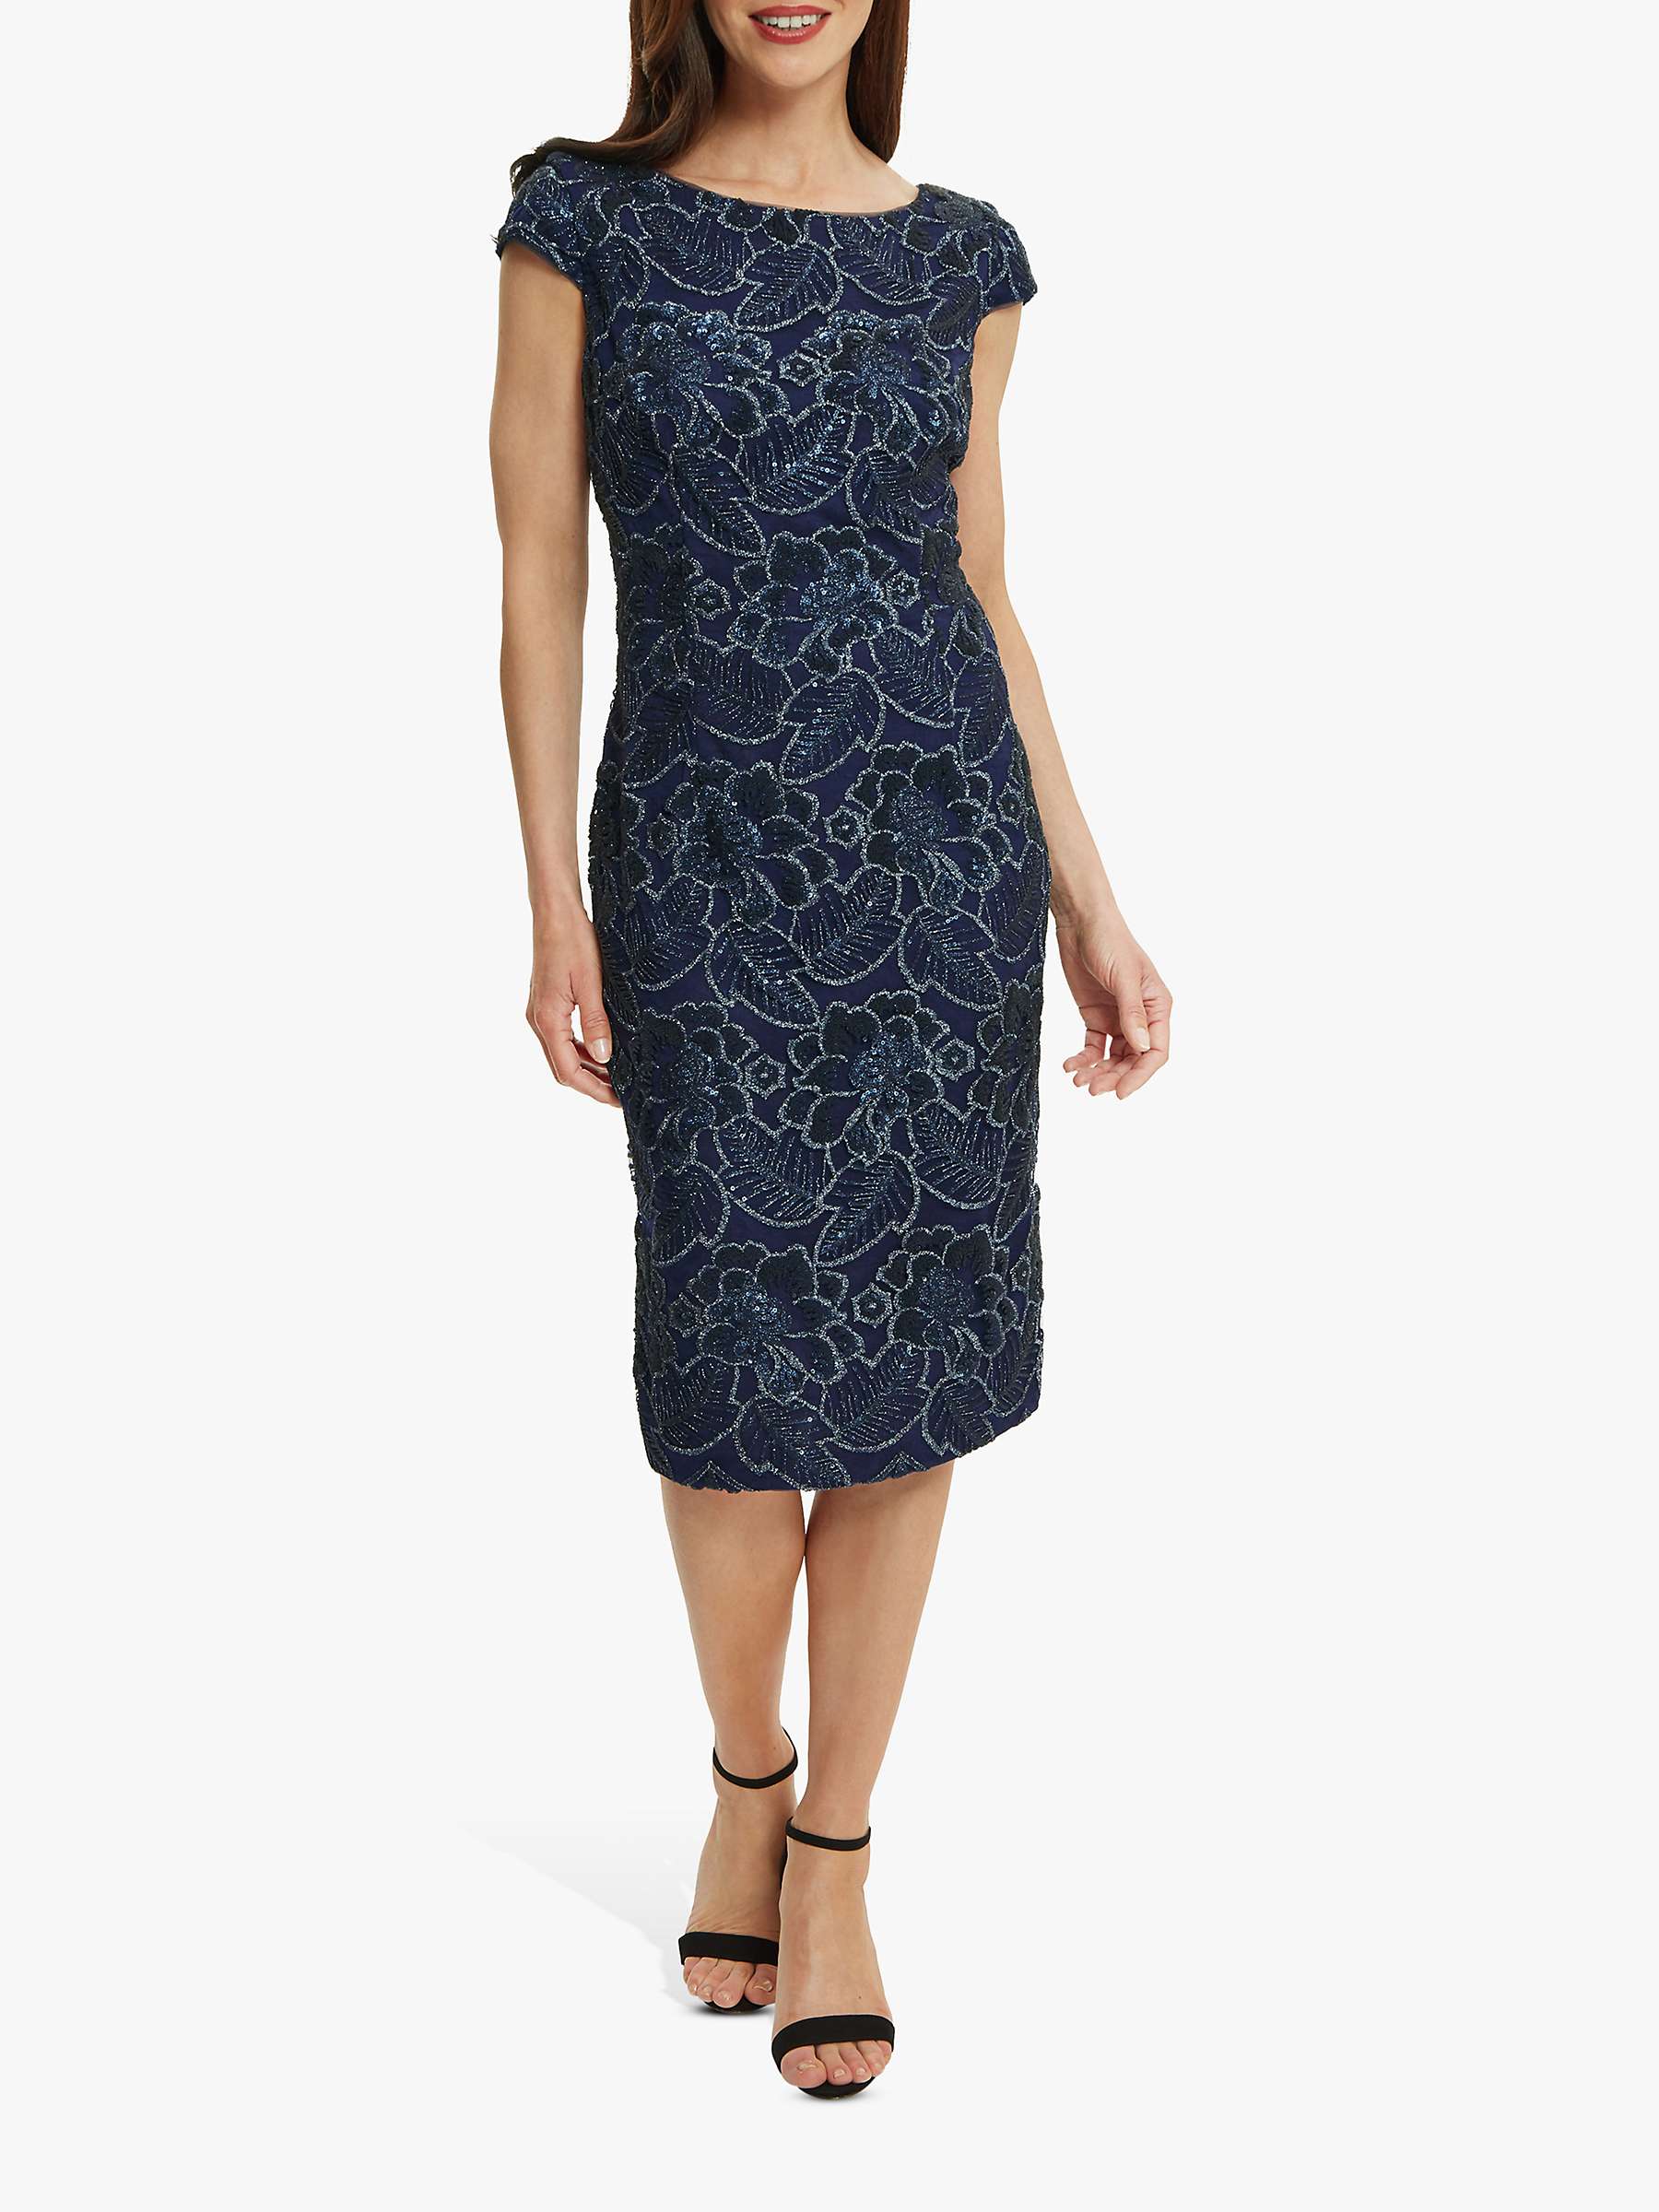 Buy Gina Bacconi Xena Floral Lace Cocktail Dress, Navy Online at johnlewis.com